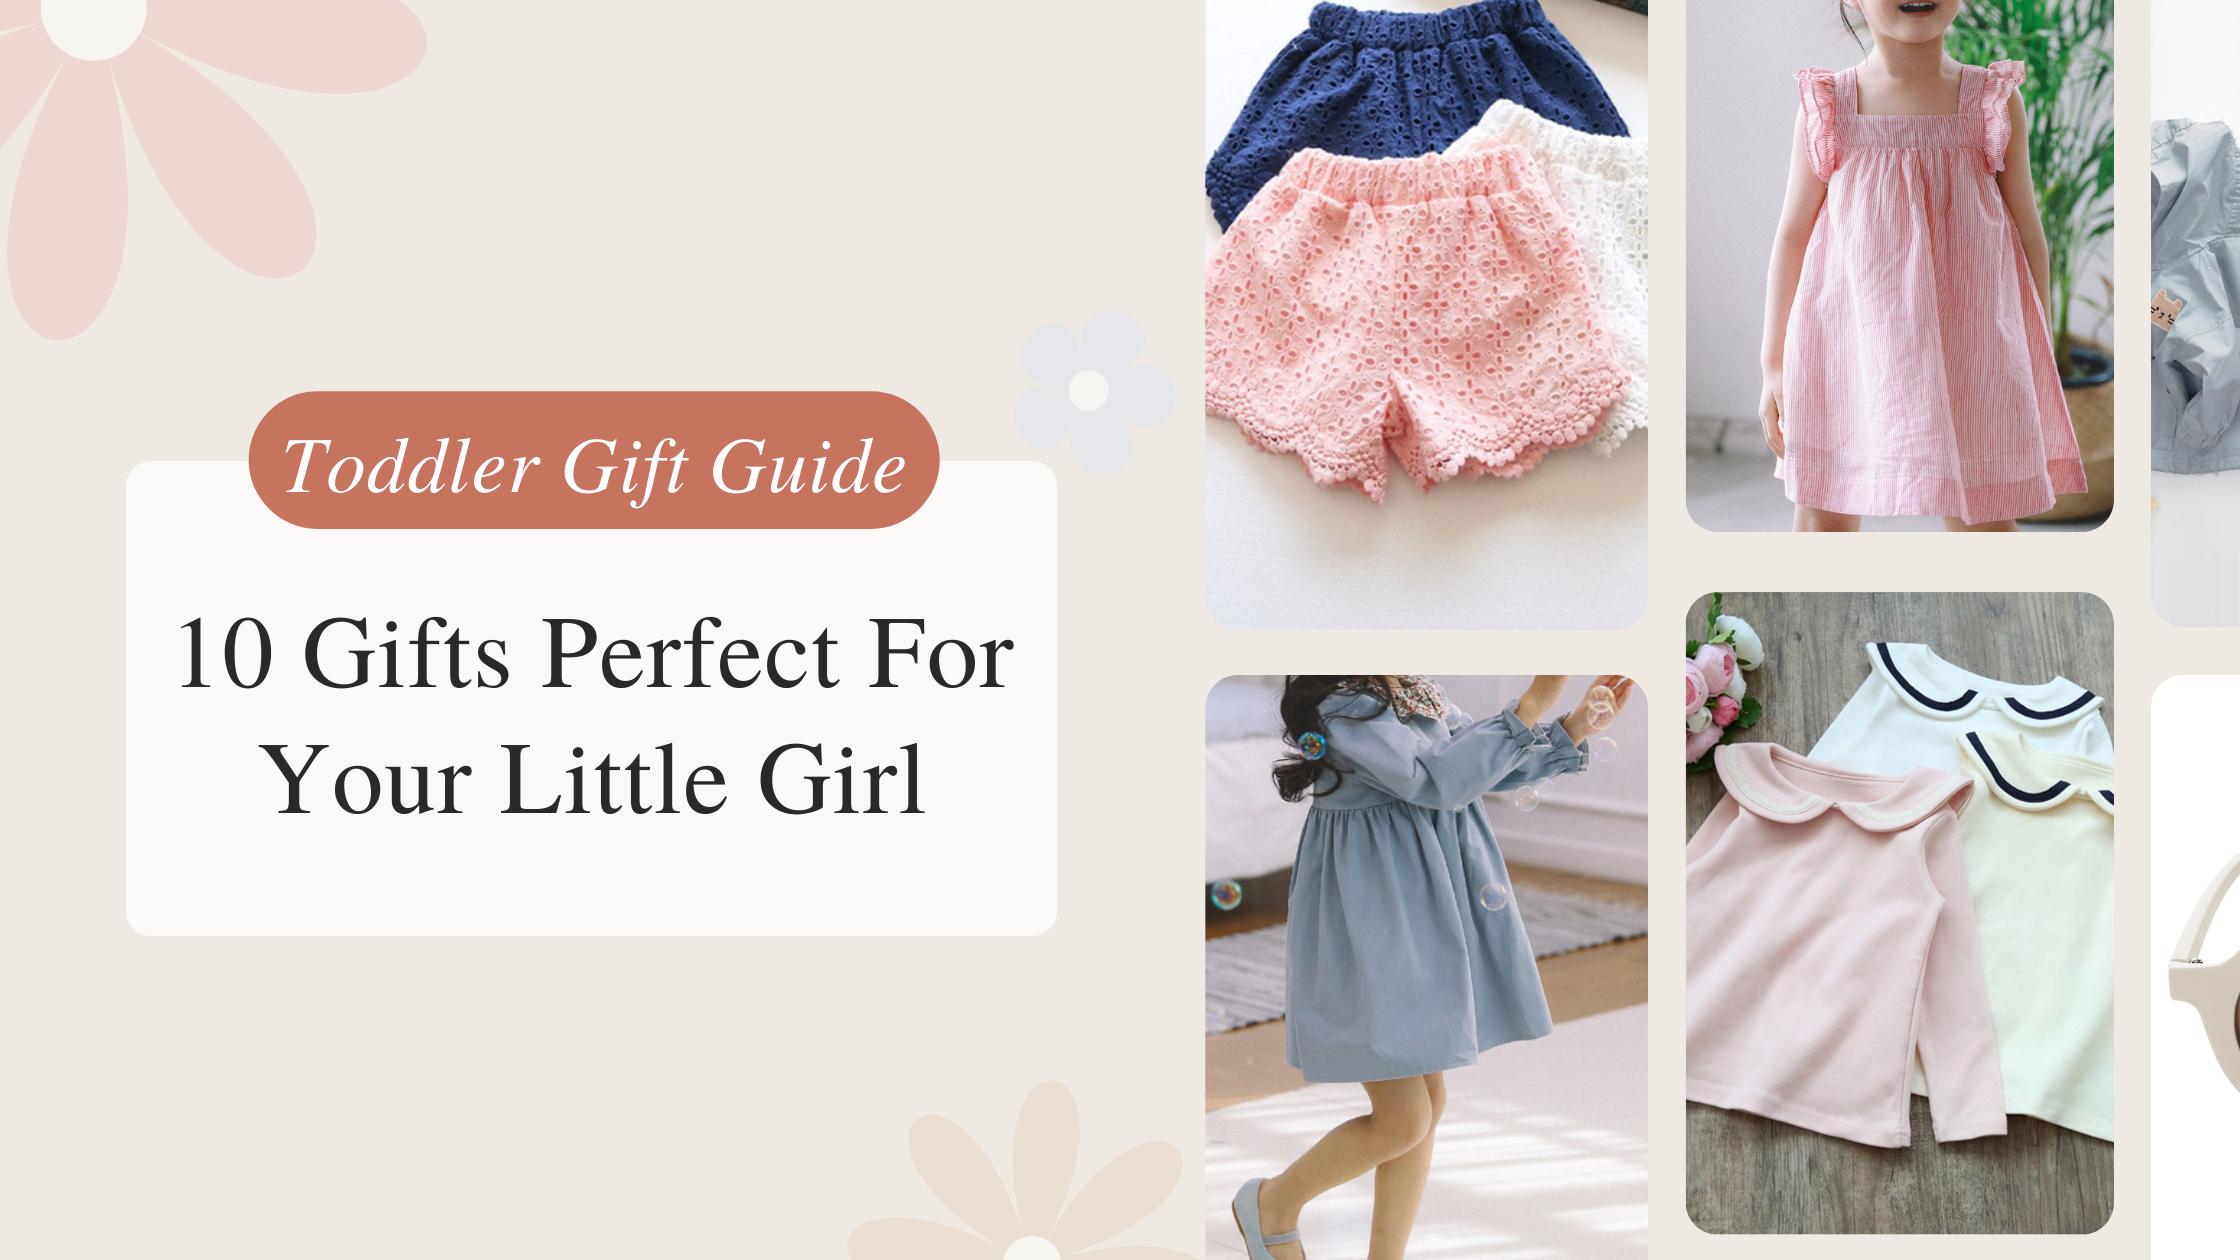 Toddler Gift Guide: 10 Gifts Perfect For Your Little Girl